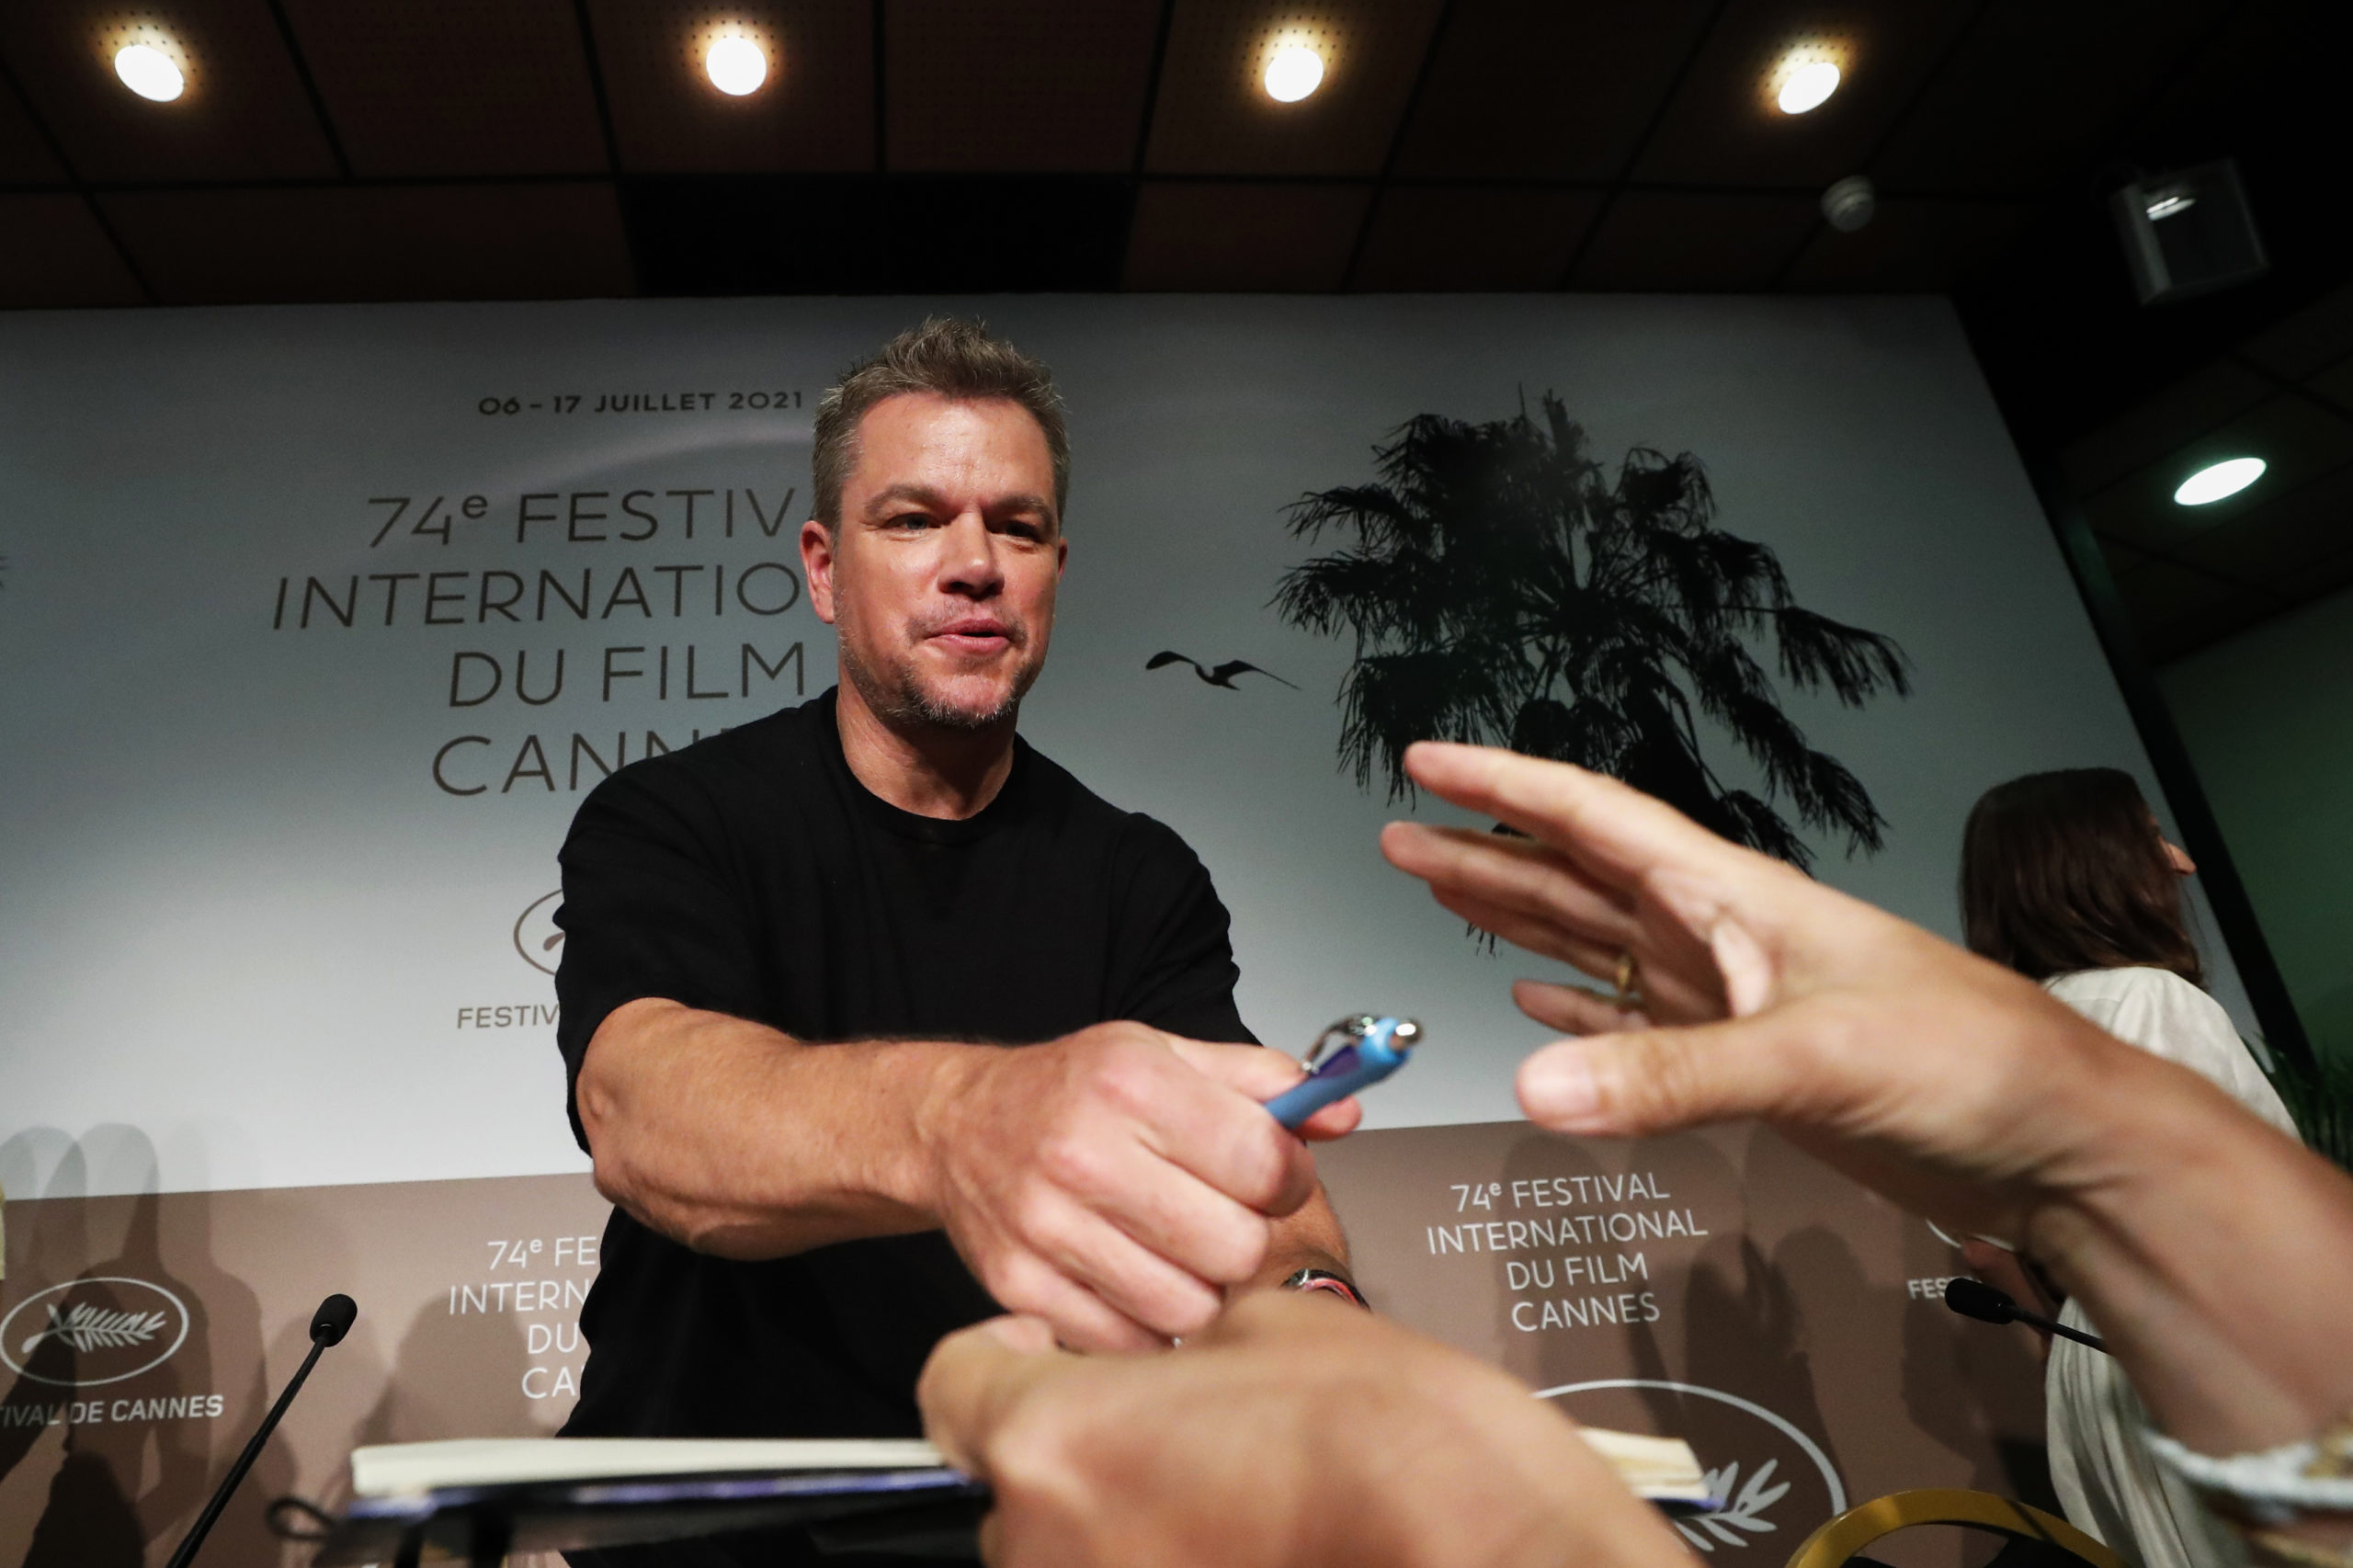 The 74th Cannes Film Festival - News conference for the film  "Stillwater" Out of Competition - Cannes, France, July 9, 2021.  Cast member Matt Damon signs autographs. REUTERS/Eric Gaillard